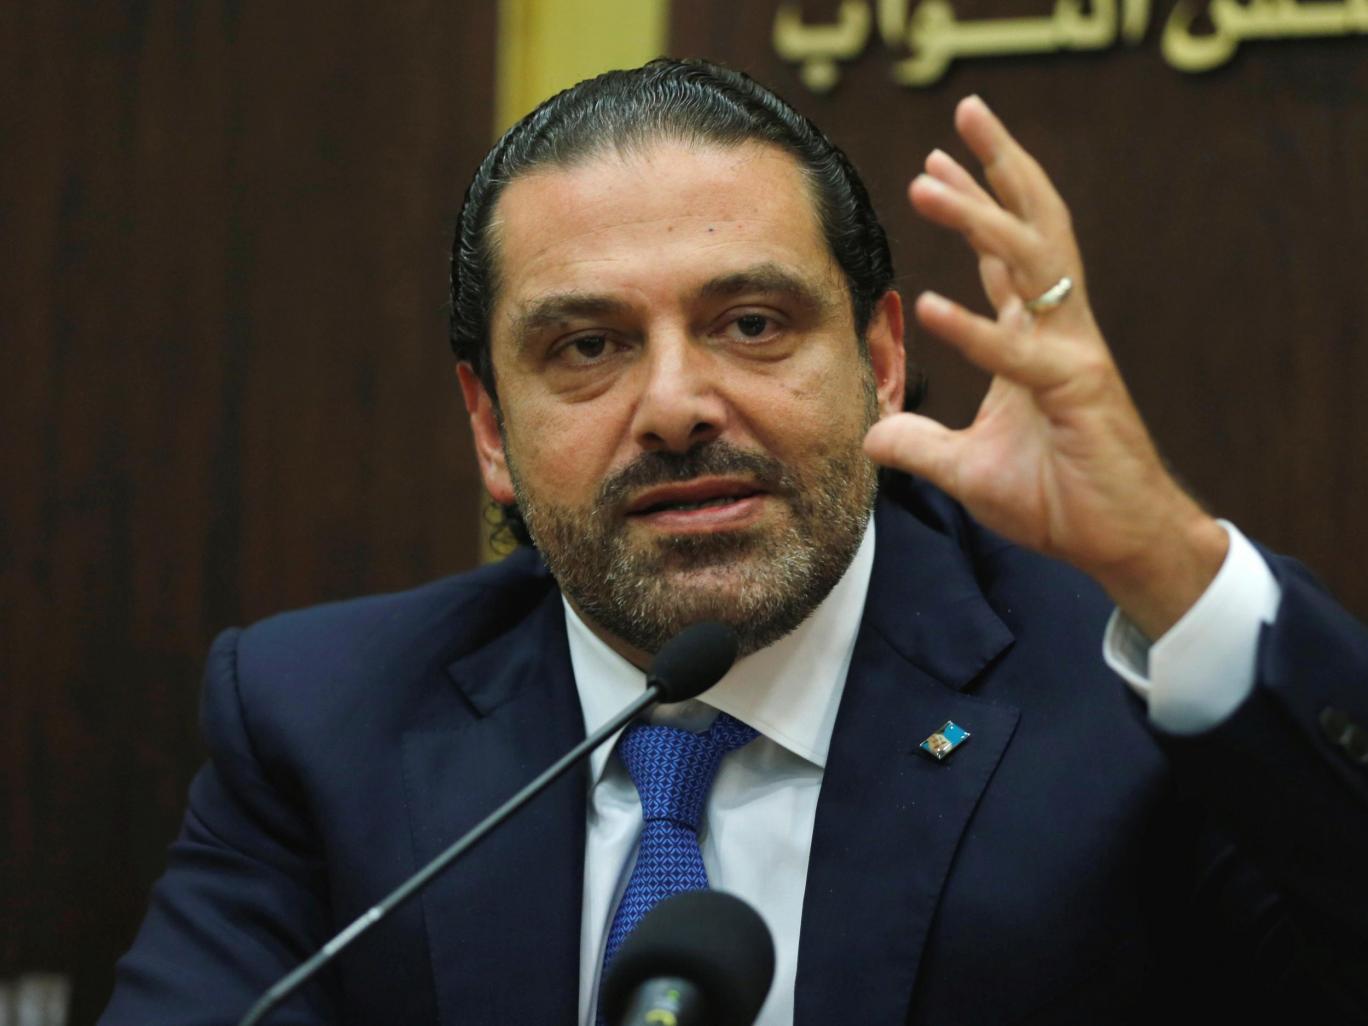 The resignation of Saad Hariri and its connection with the regional crisis